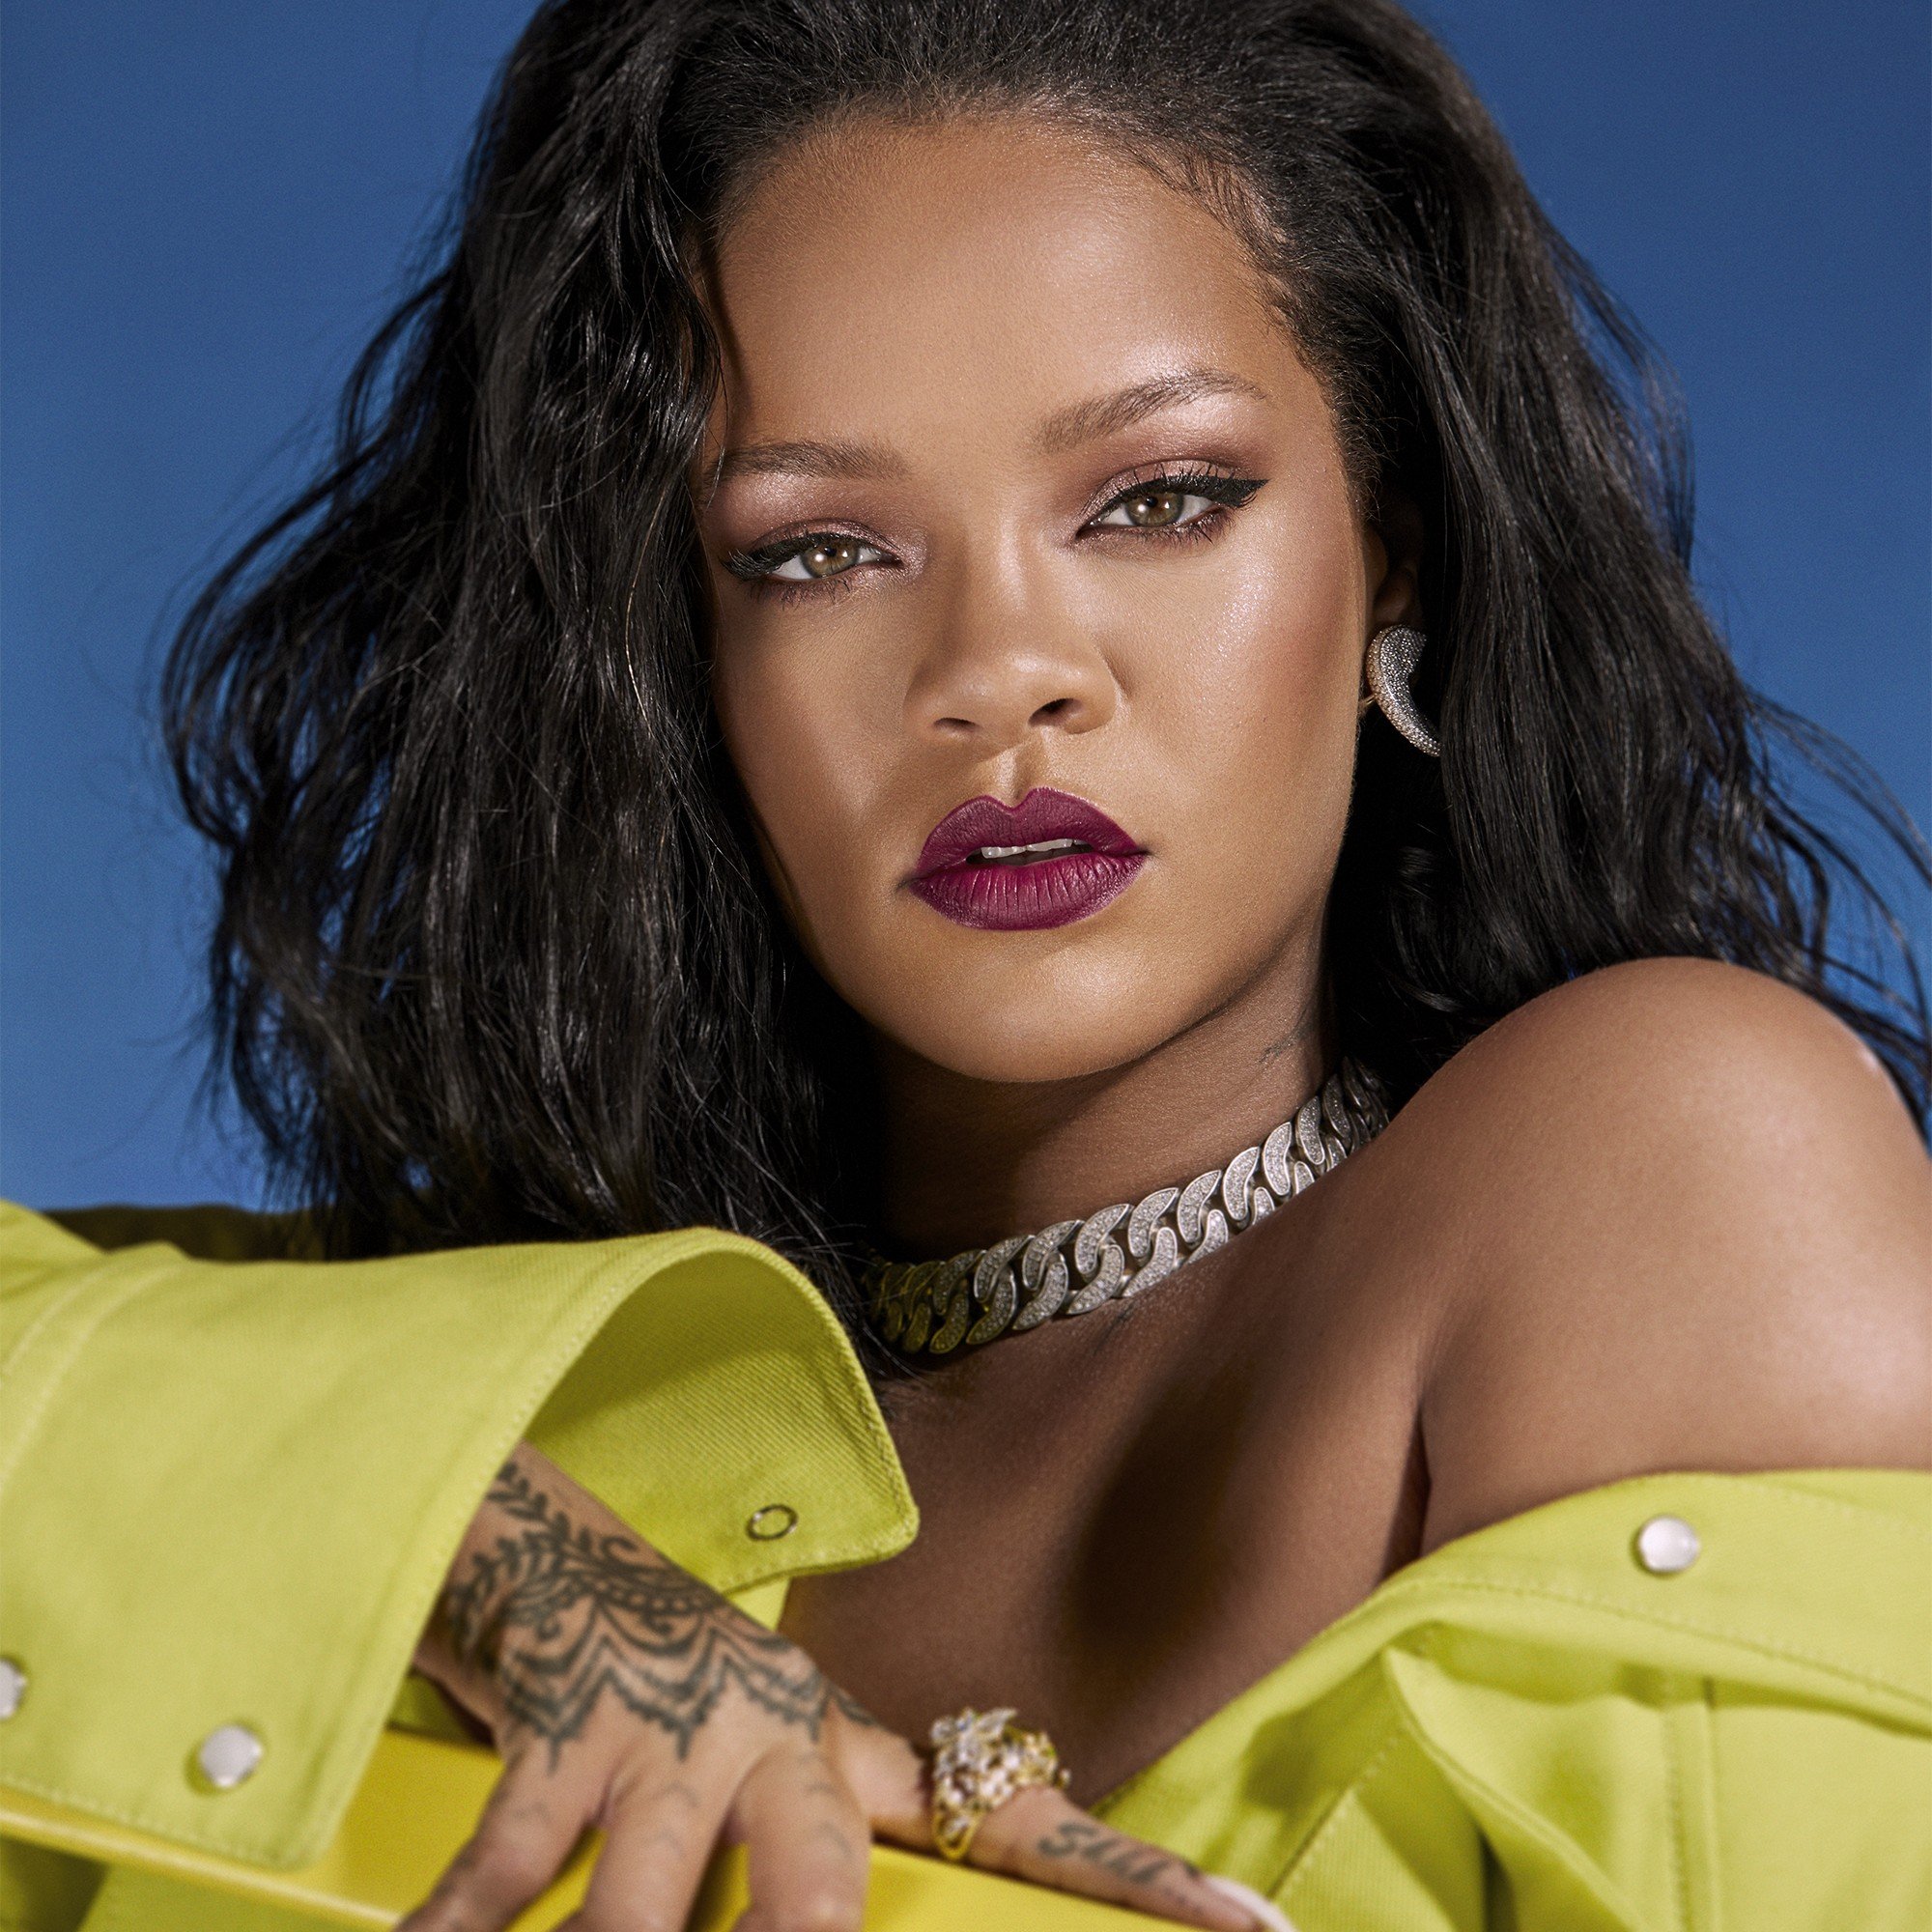 Rihanna, founder of Fenty Beauty, which is coming to Hong Kong in September.